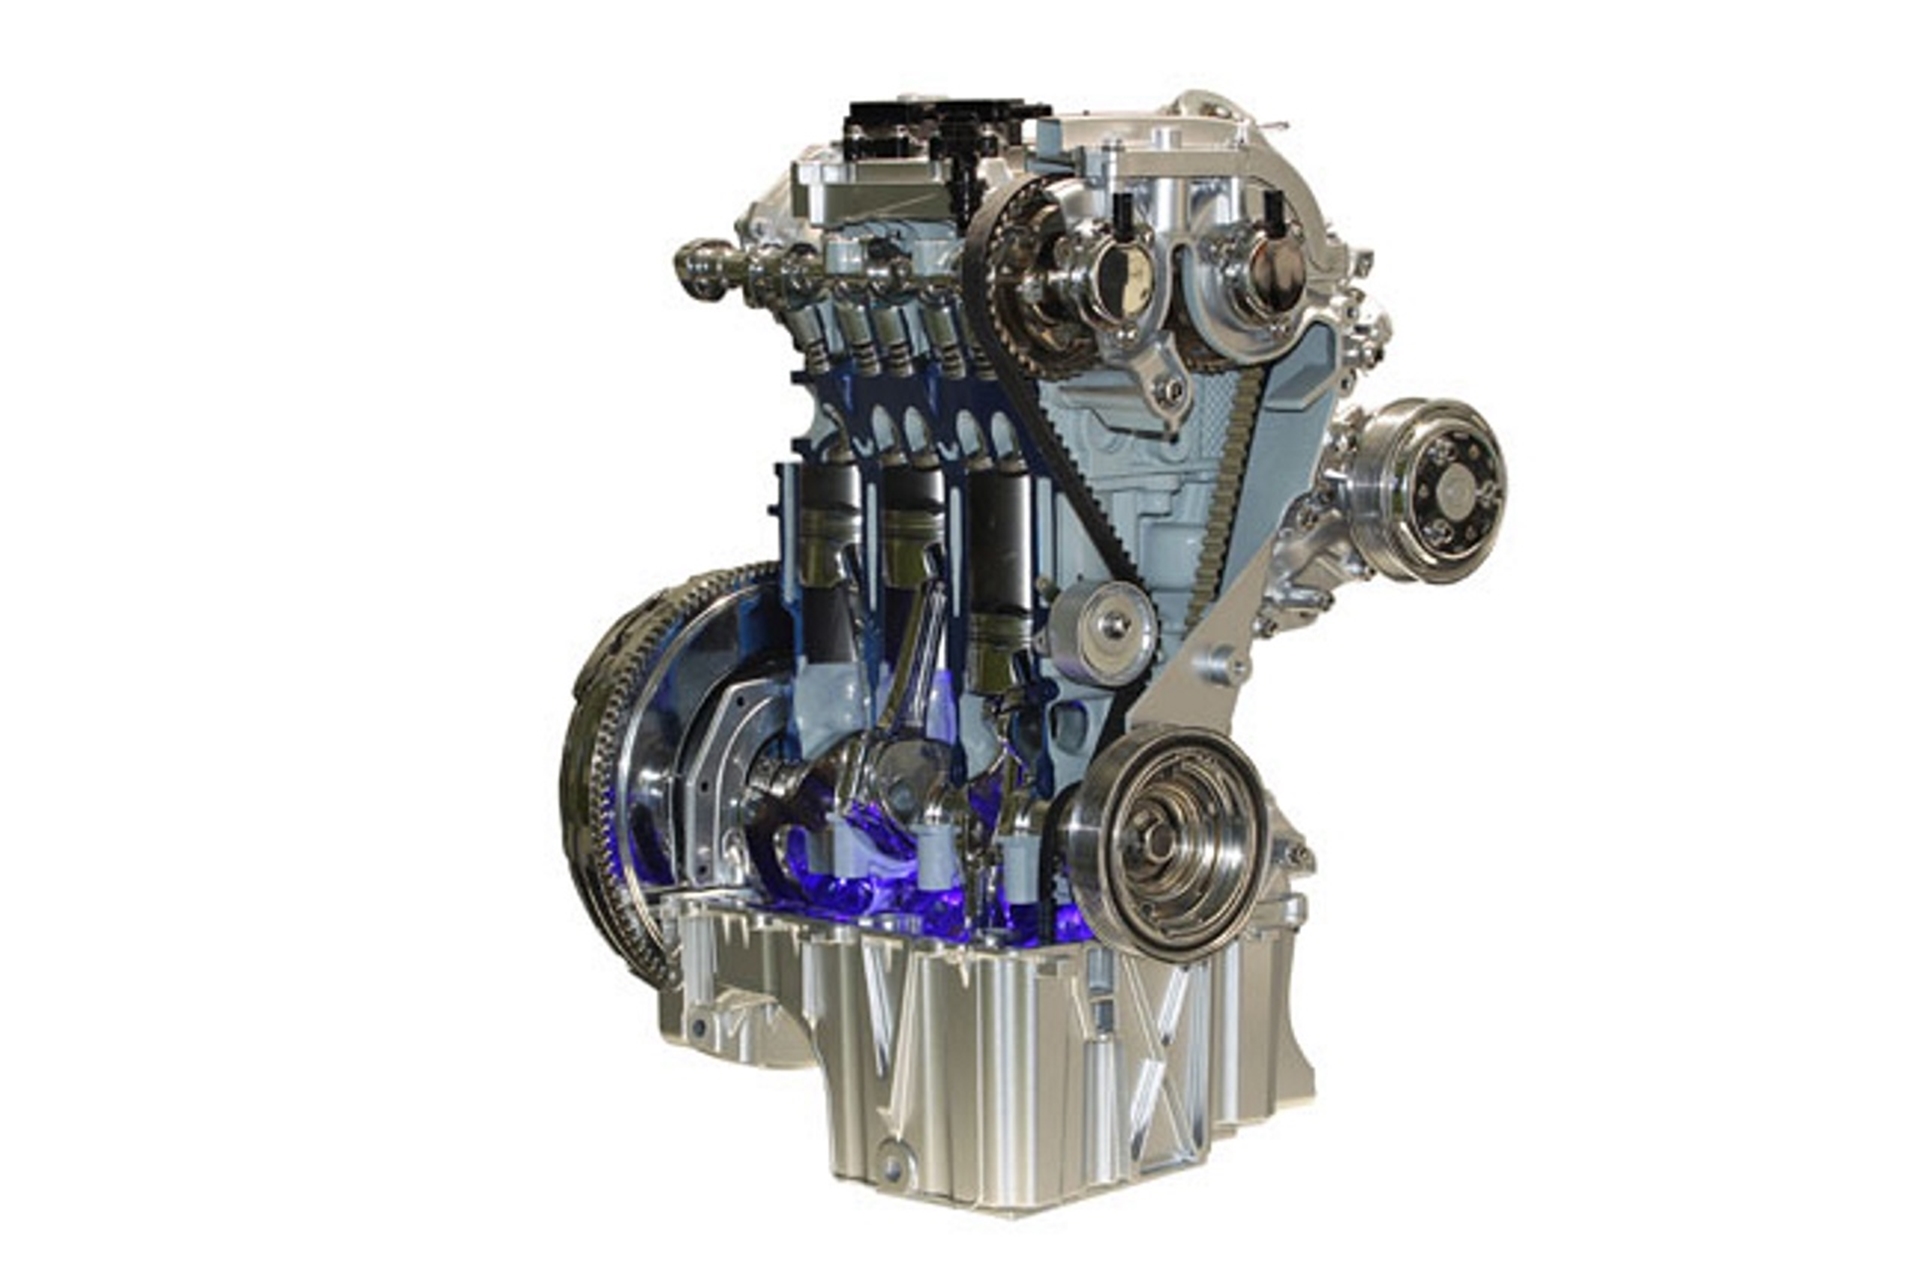 Ford’s 1.0-litre EcoBoost Wins International Engine of the Year: Small but Powerful Engine Called ‘Remarkable’